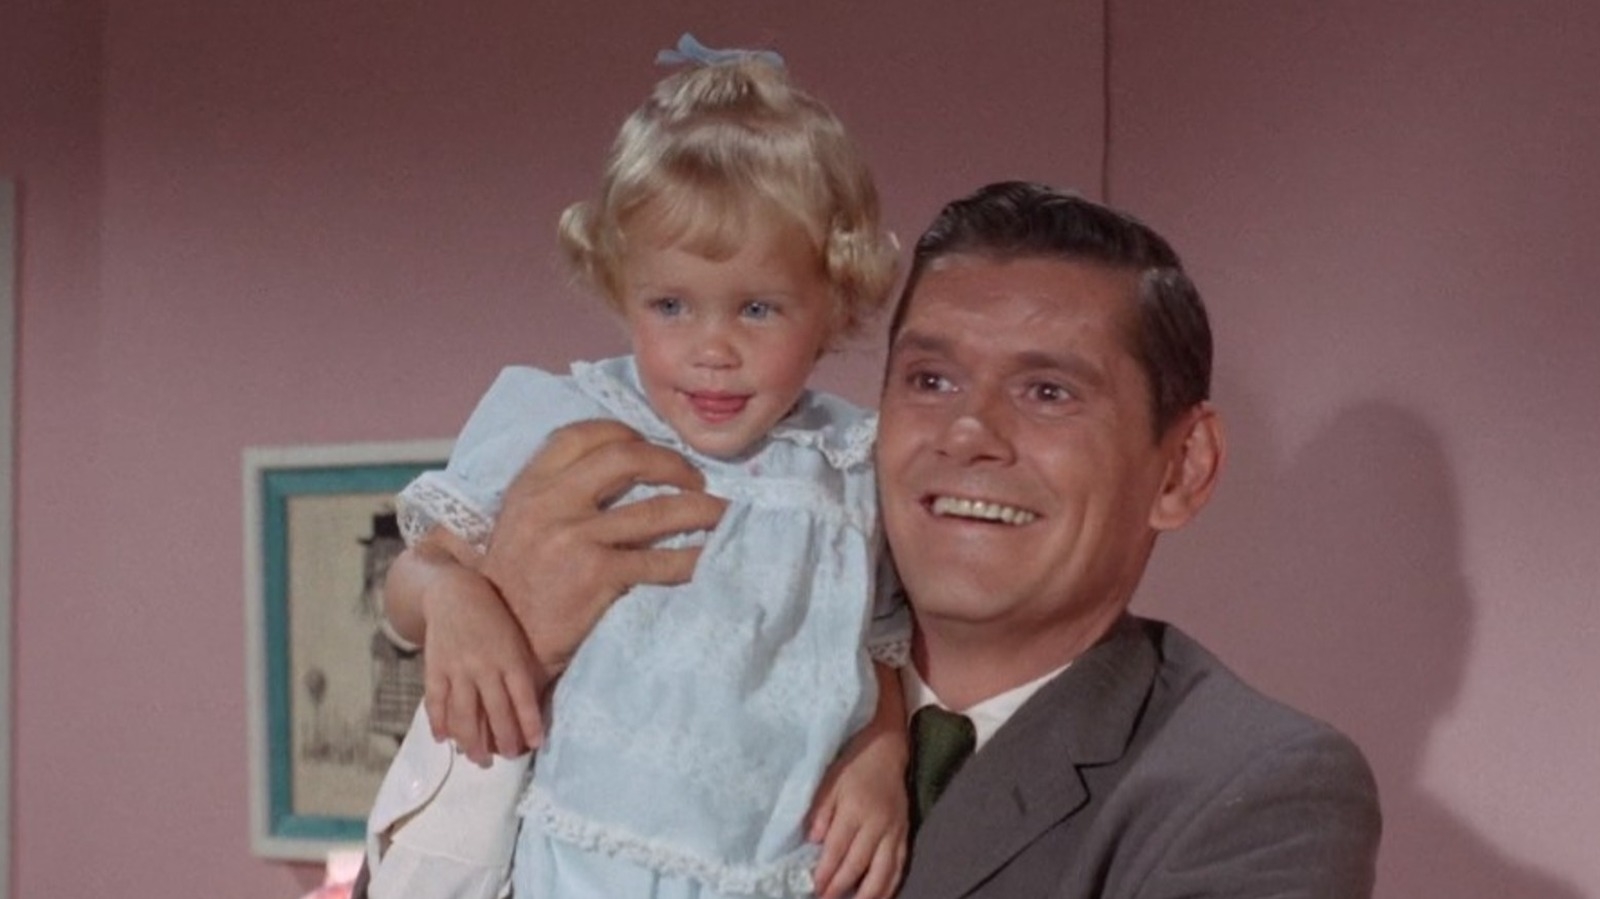 Man holding young child, both smiling, in a scene from a classic TV show